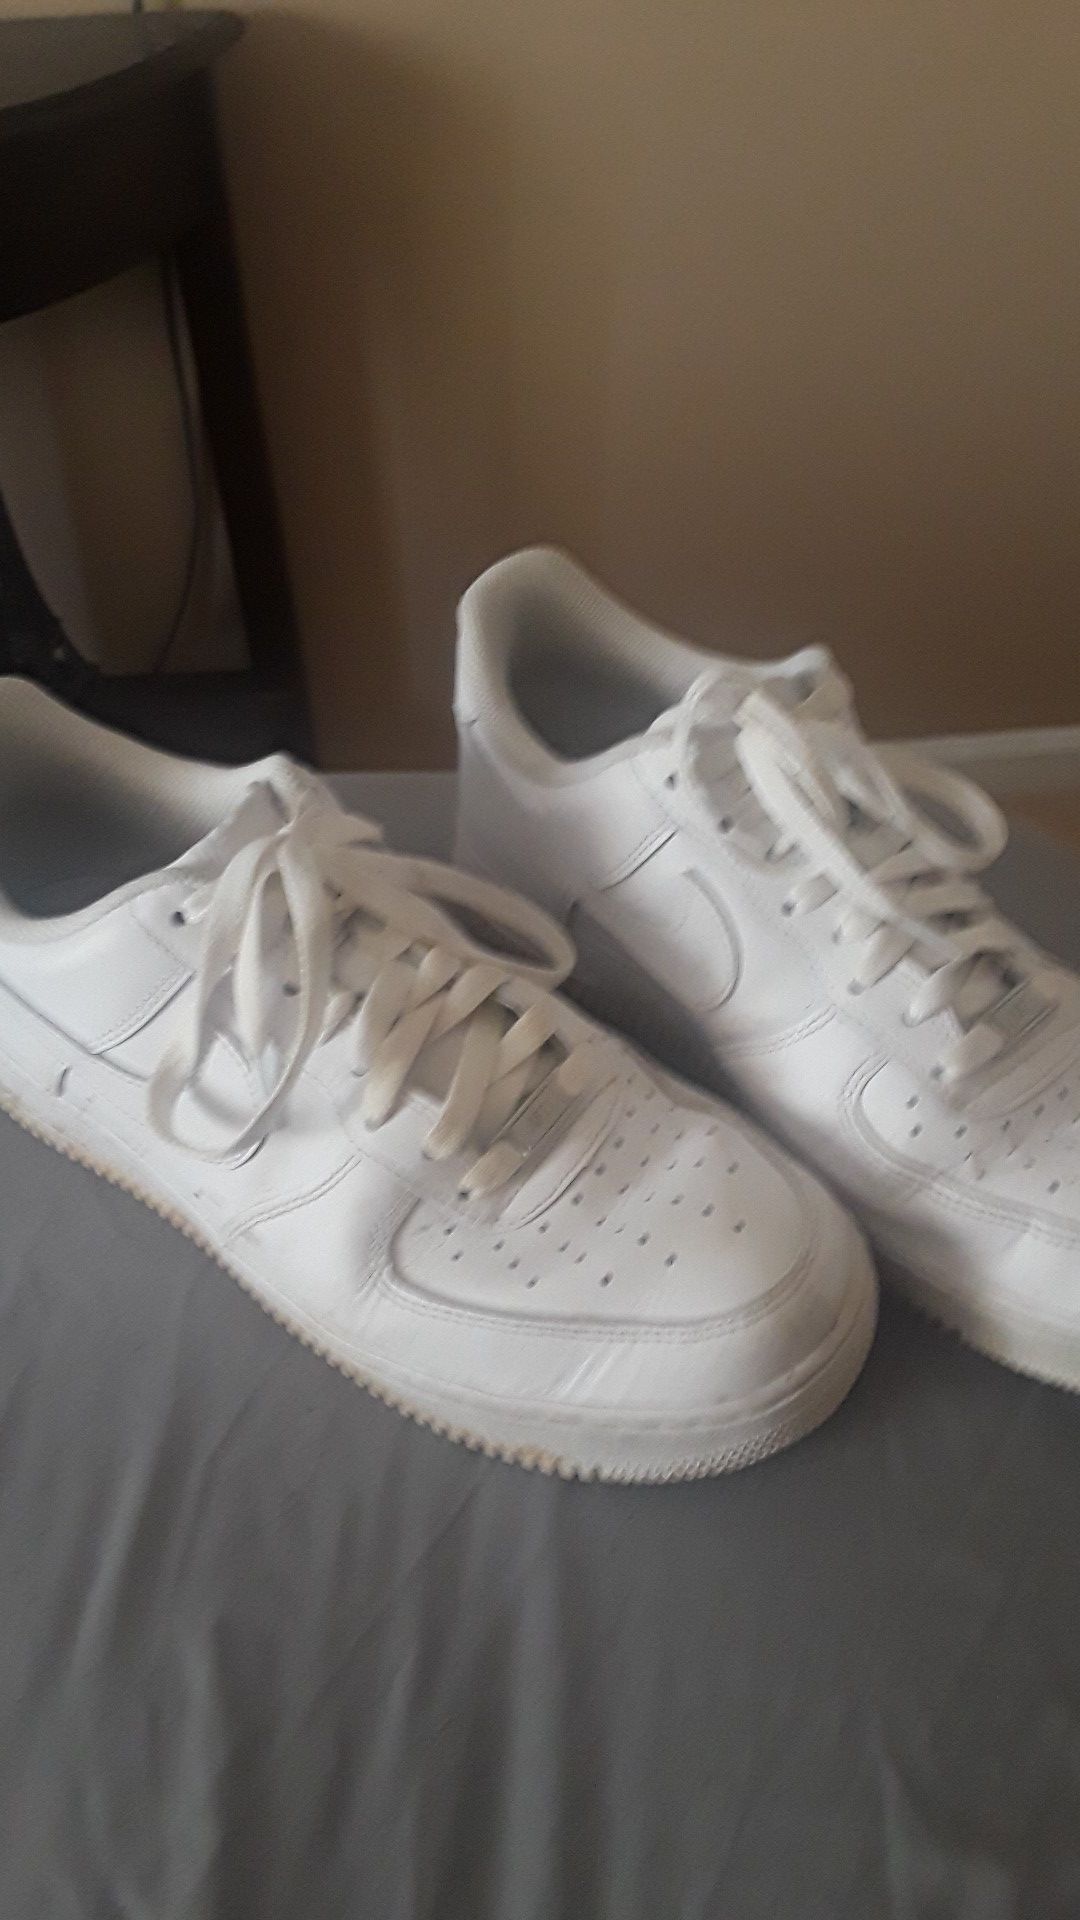 Air force 1 size 9 1/2